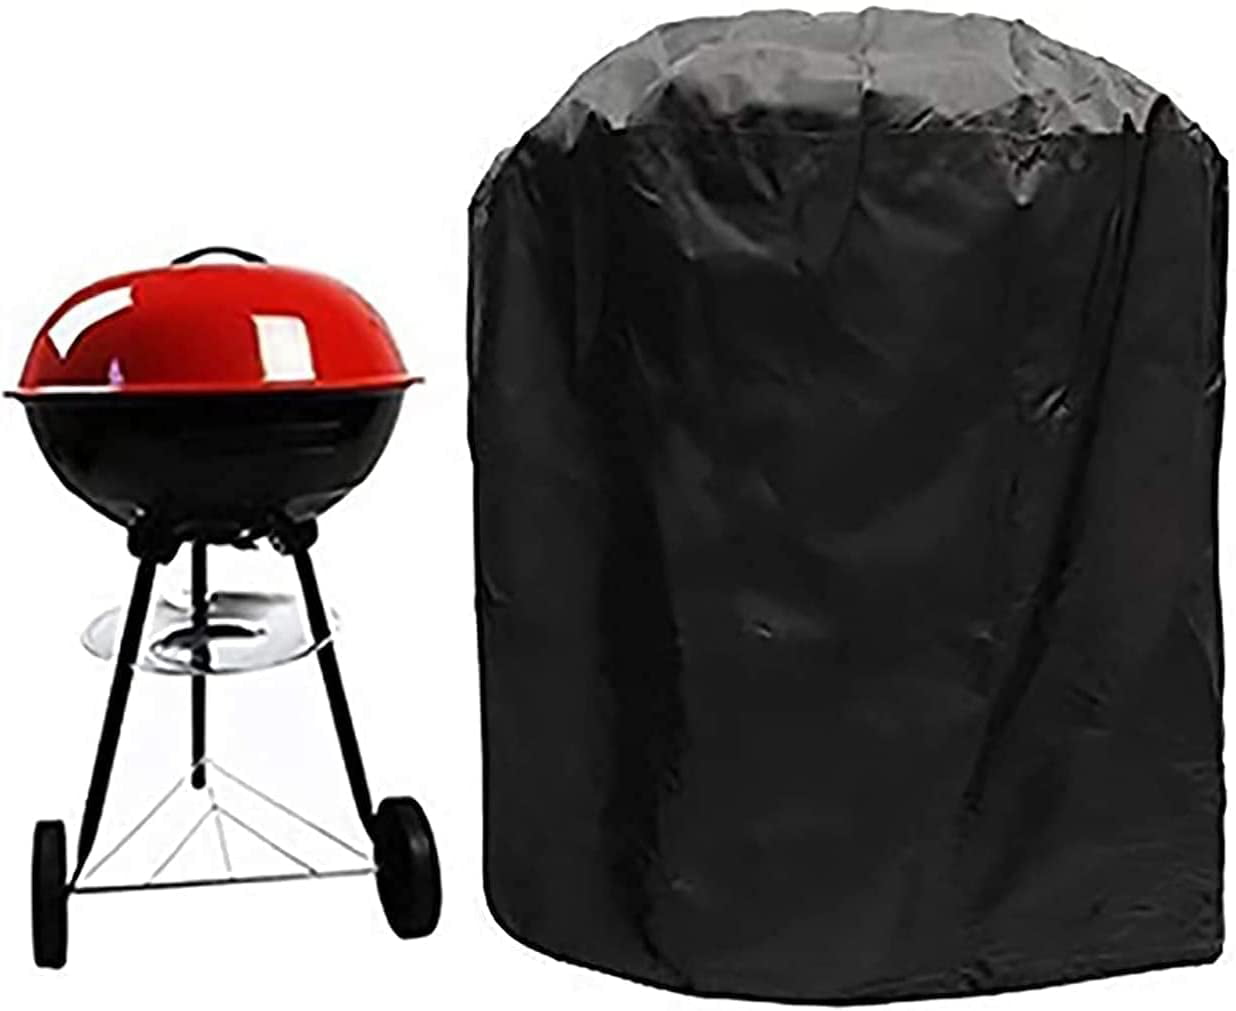 Brinkmann,Char Broil etc Kettle BBQ Cover Round Barbecue Cover Waterproof Heavy Duty 420D Oxford Fabric Kettle BBQ Cover Rip-Proof,Windproof & Anti-UV for Weber 72 x 77cm